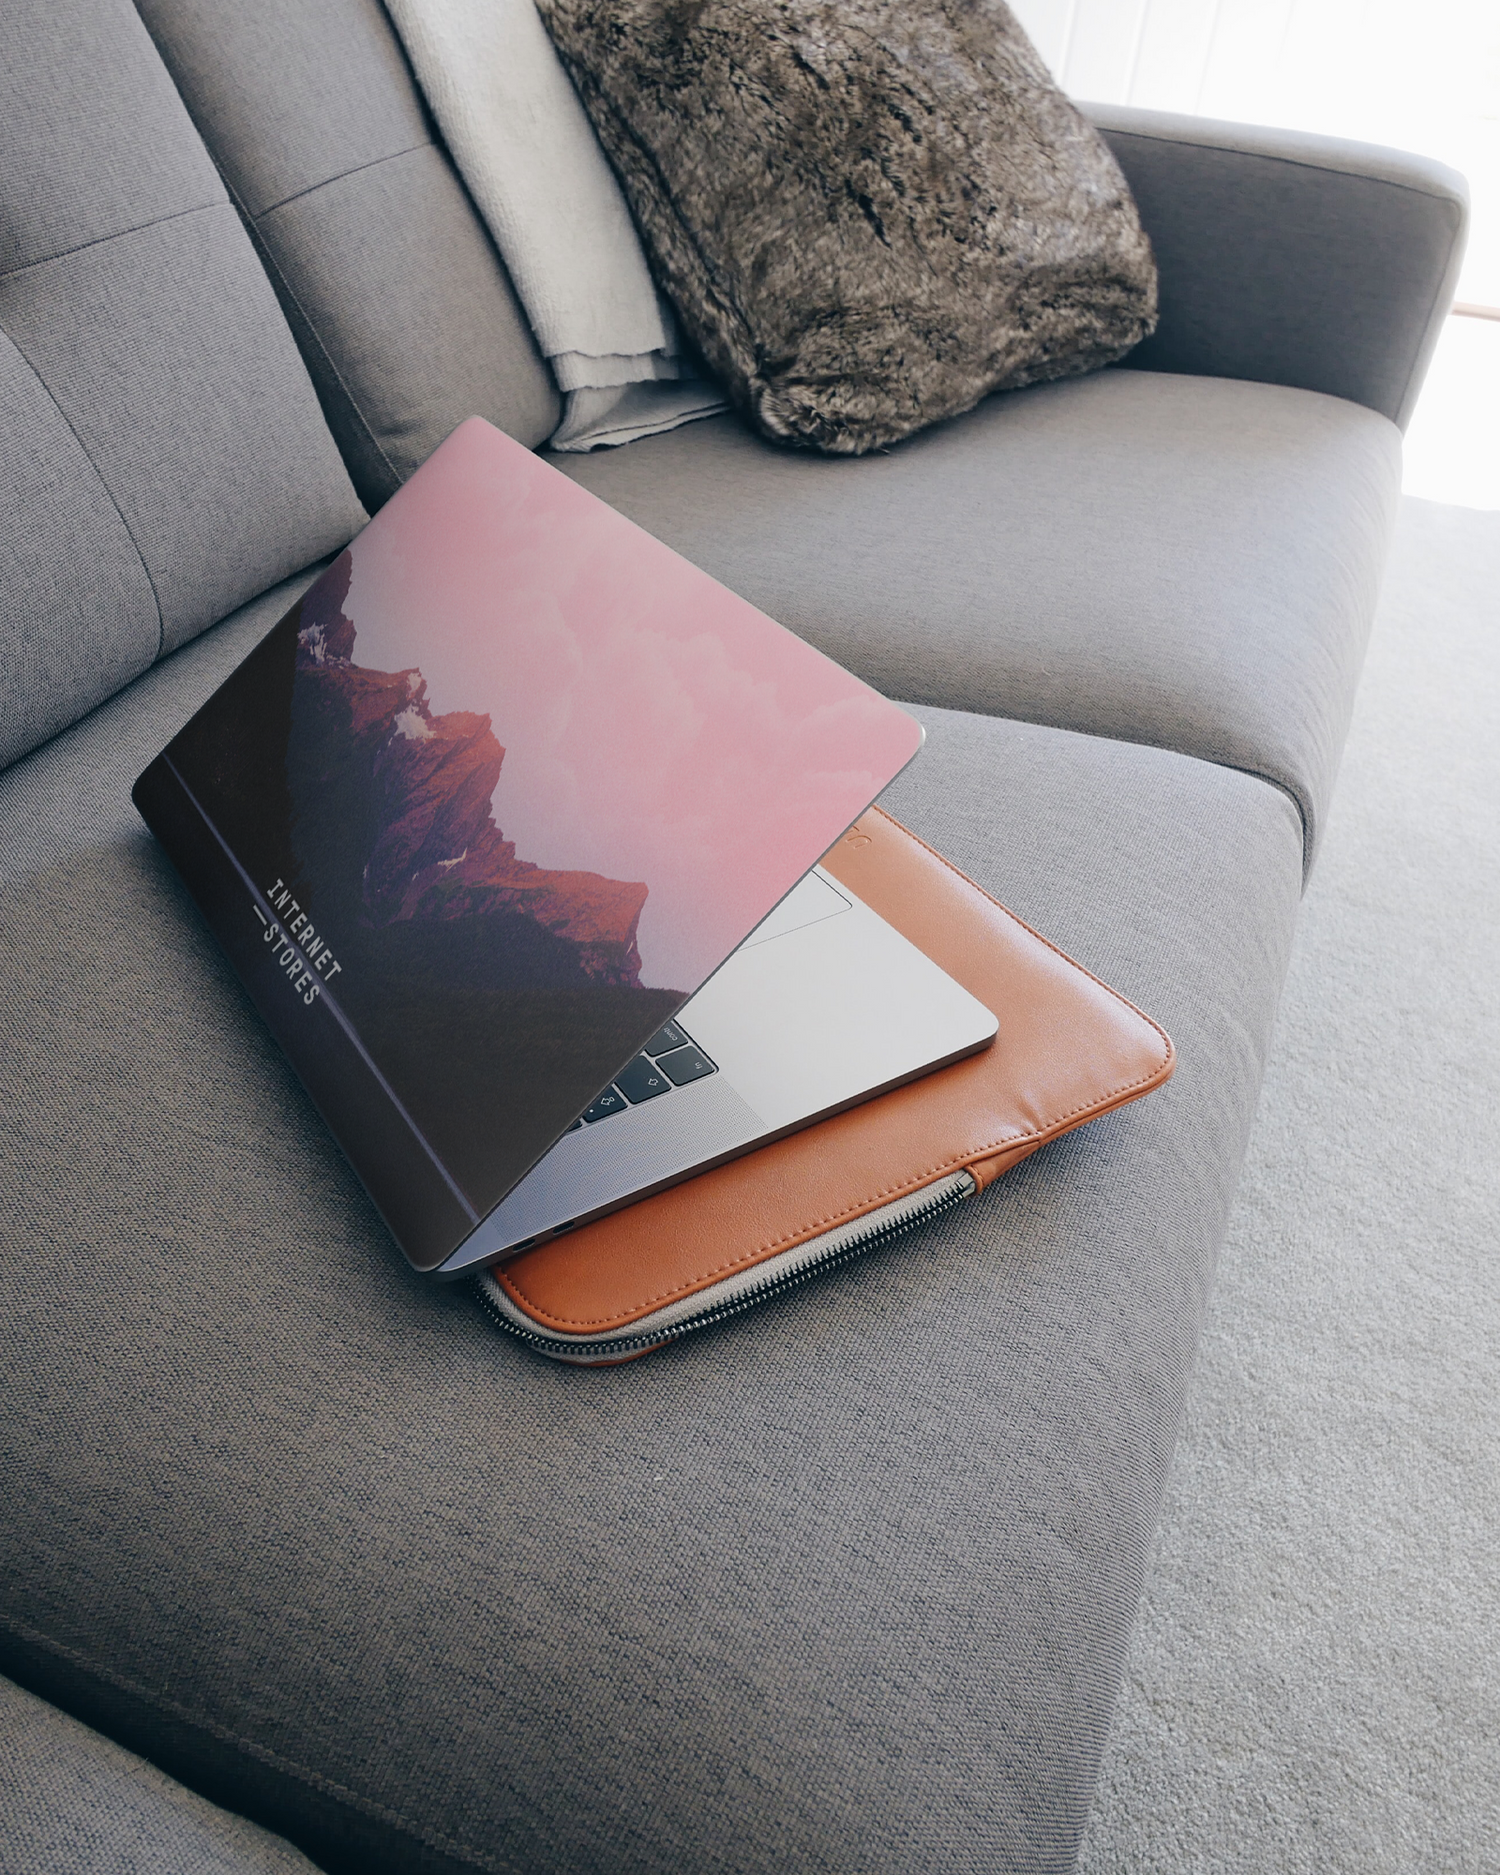 Lake Laptop Skin for 15 inch Apple MacBooks on a couch